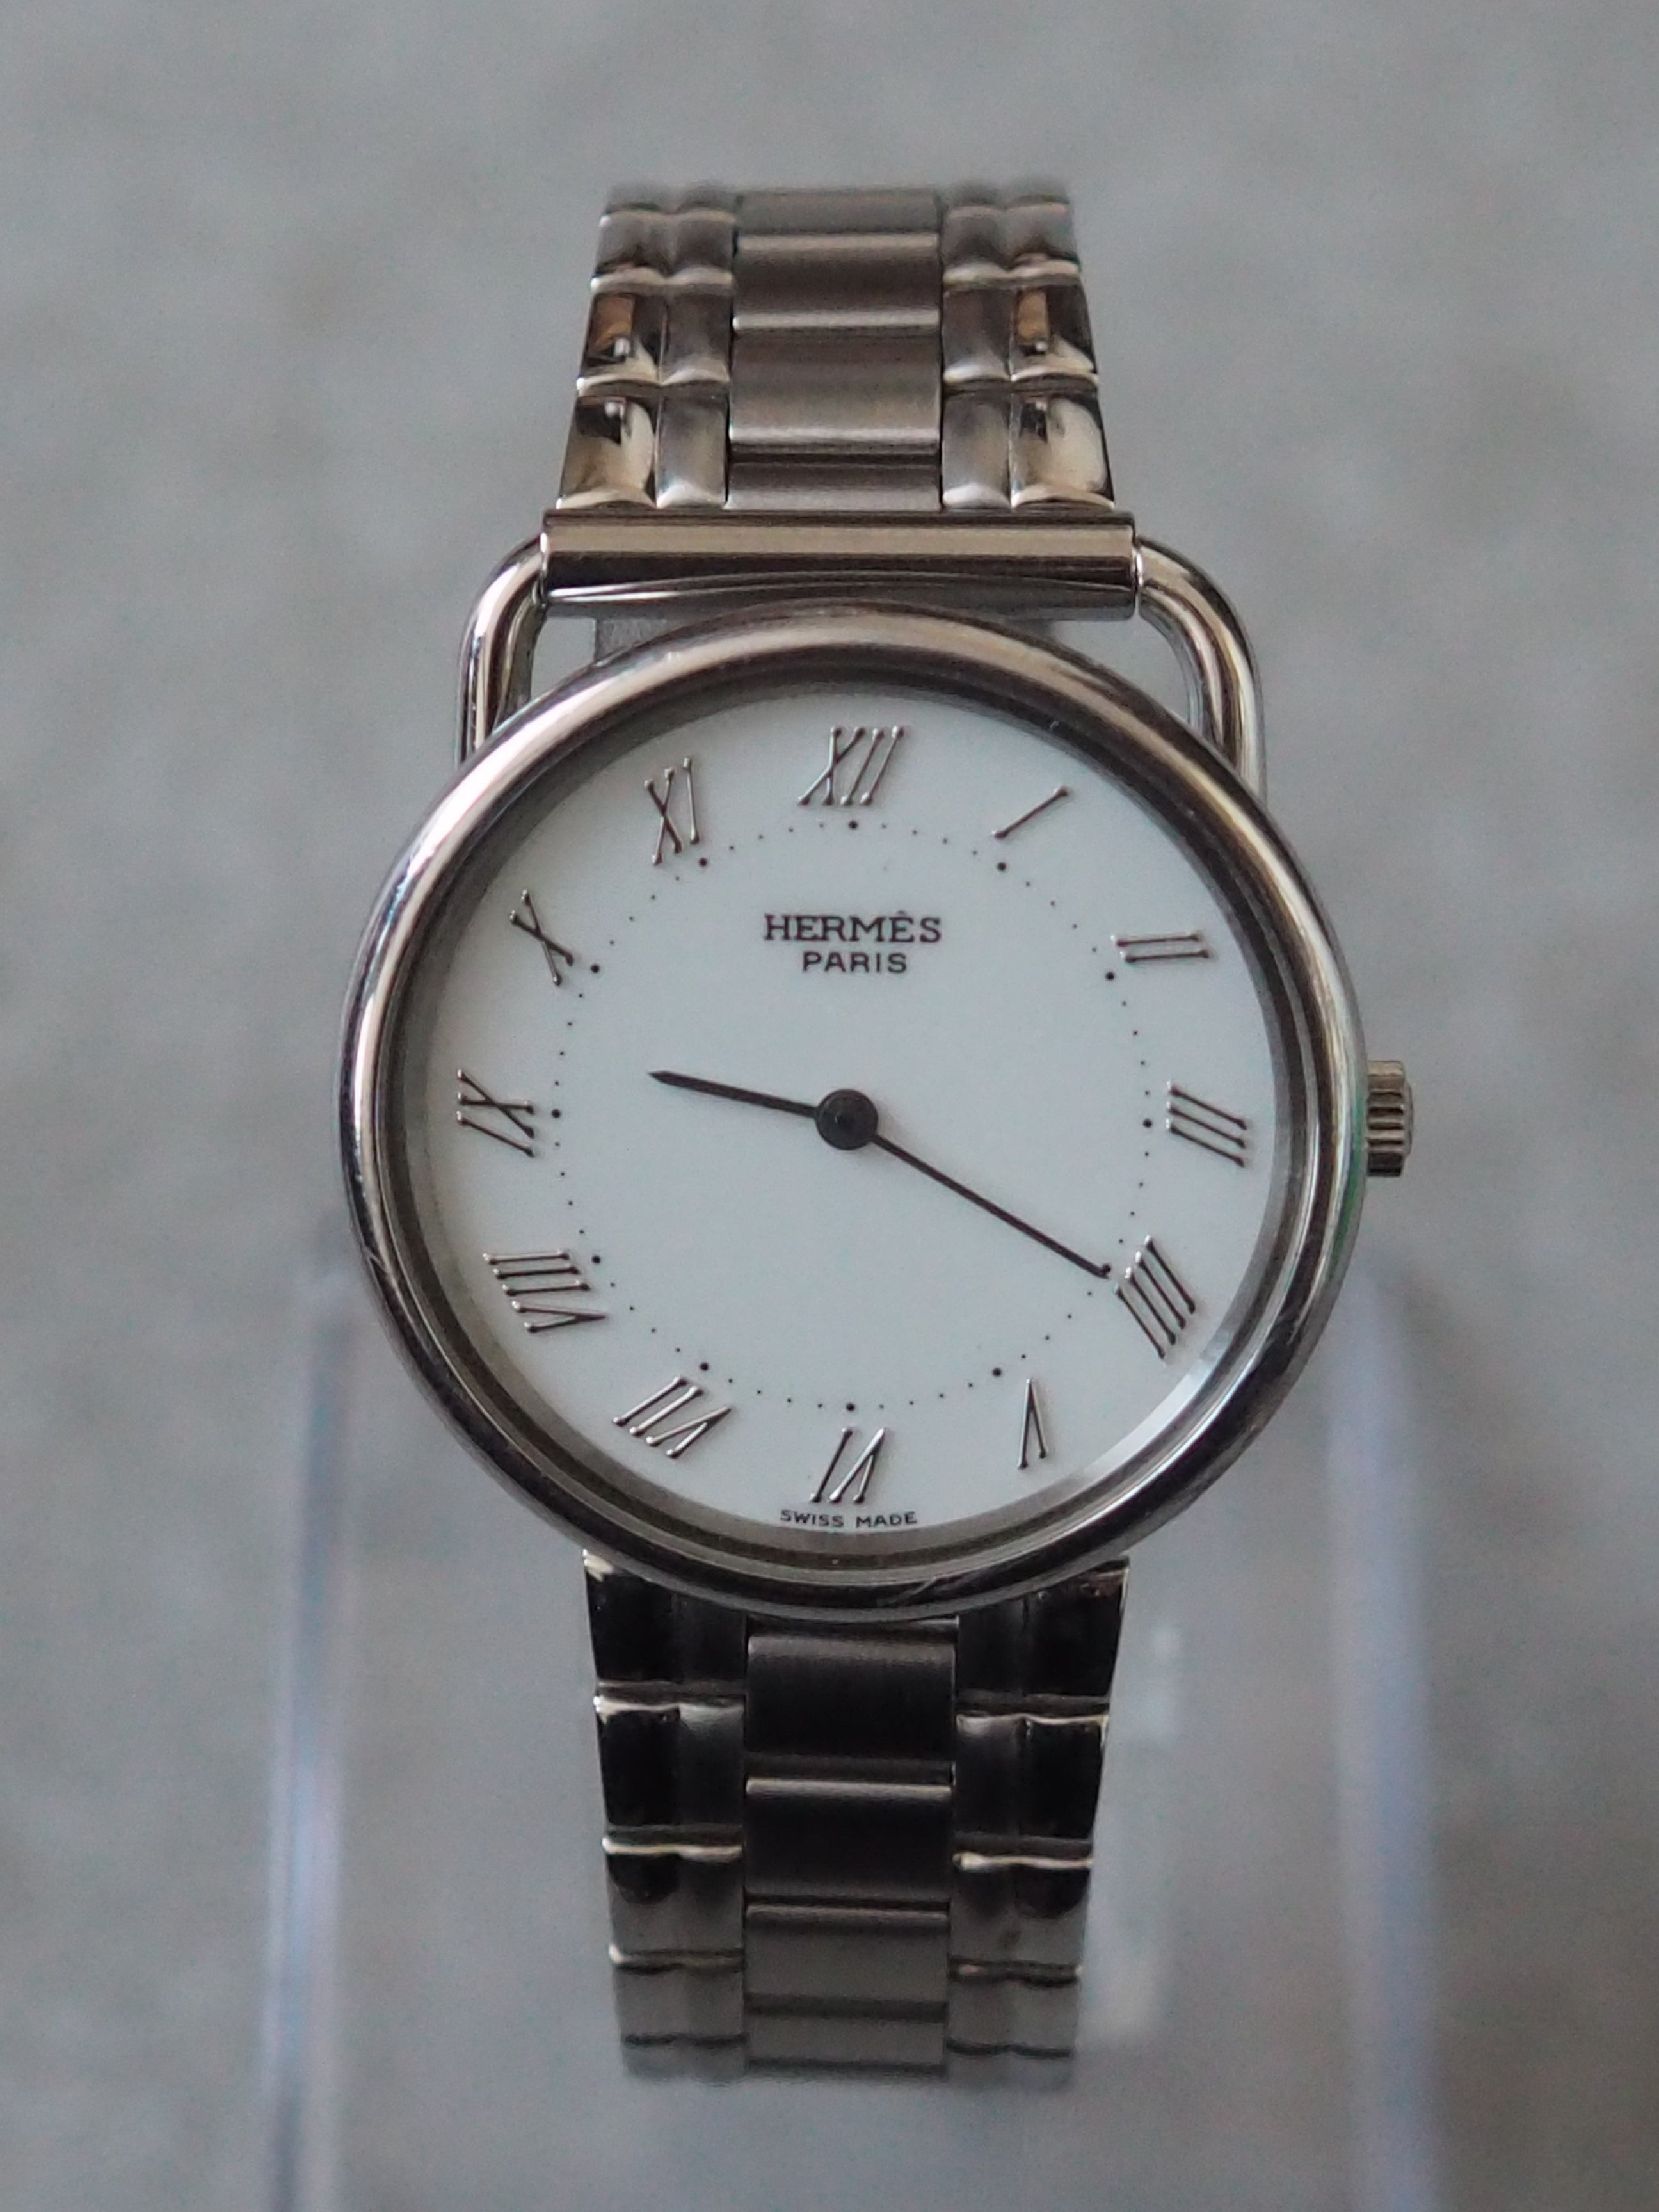 HERMES Also Watch